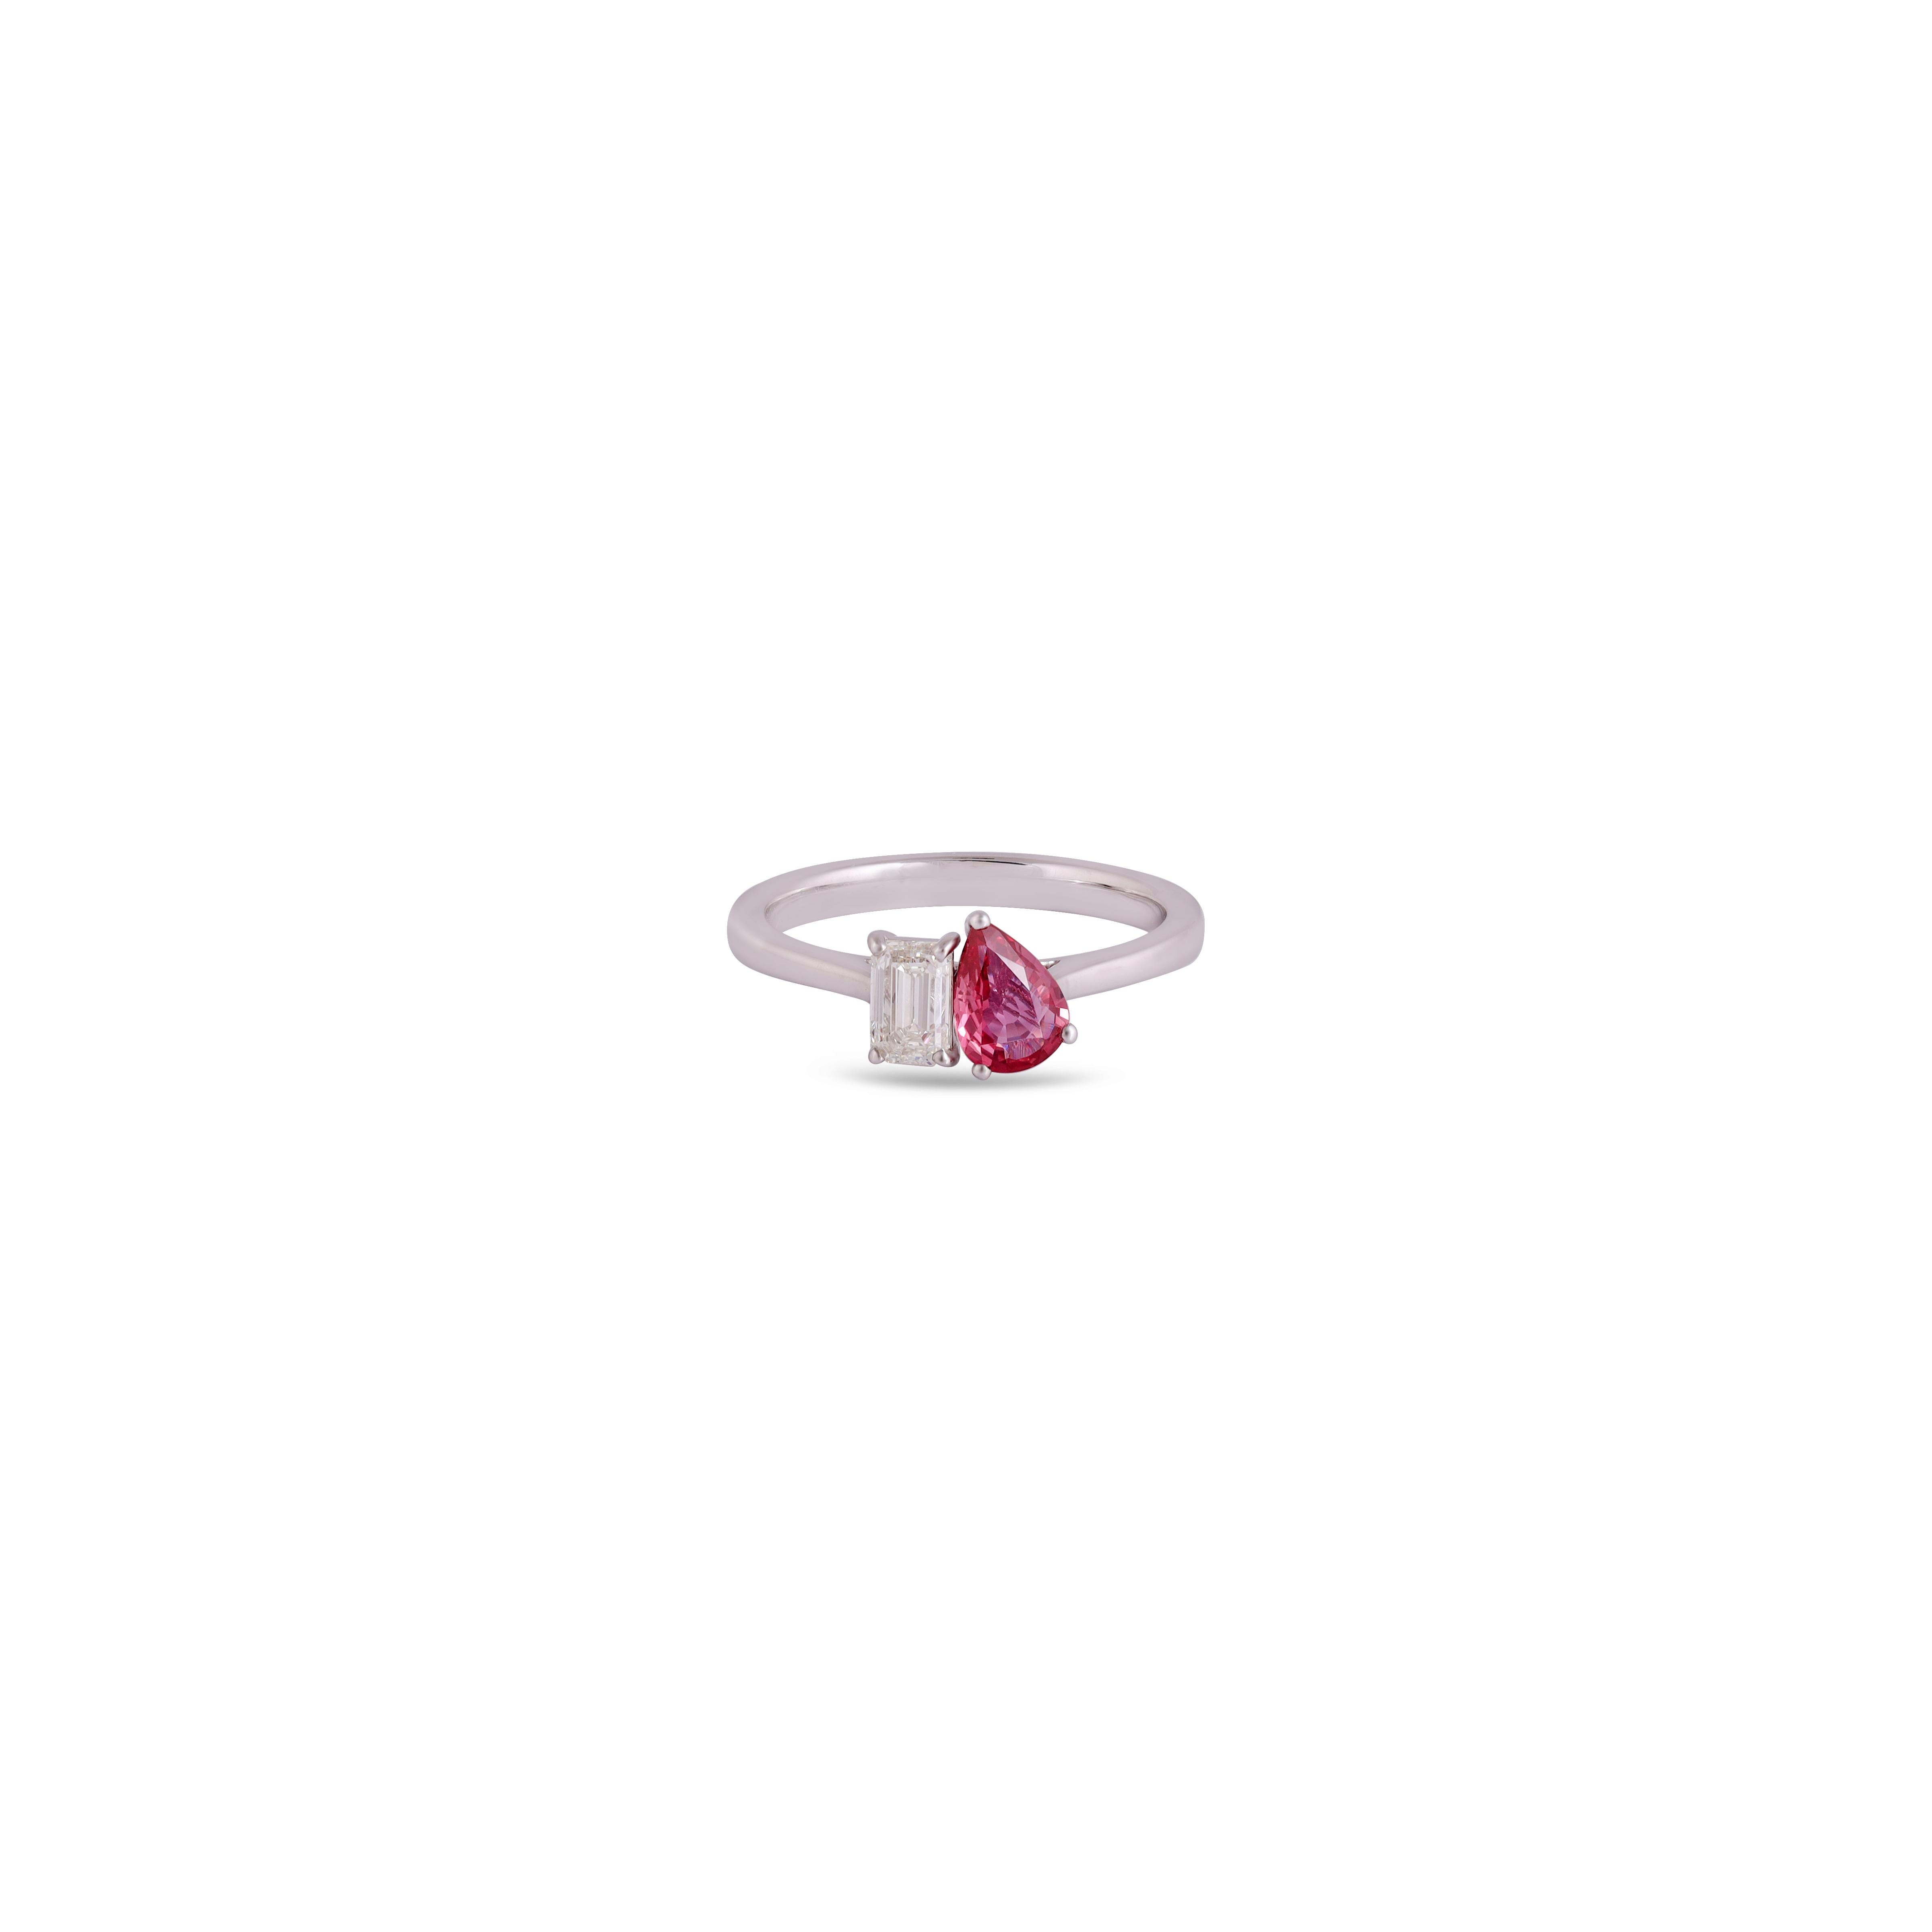 Ruby = 0.67  Carat
Diamond = 0.50 Carats
Metal: 18K White Gold
Ring Size: 7* US
*It can be resized 
